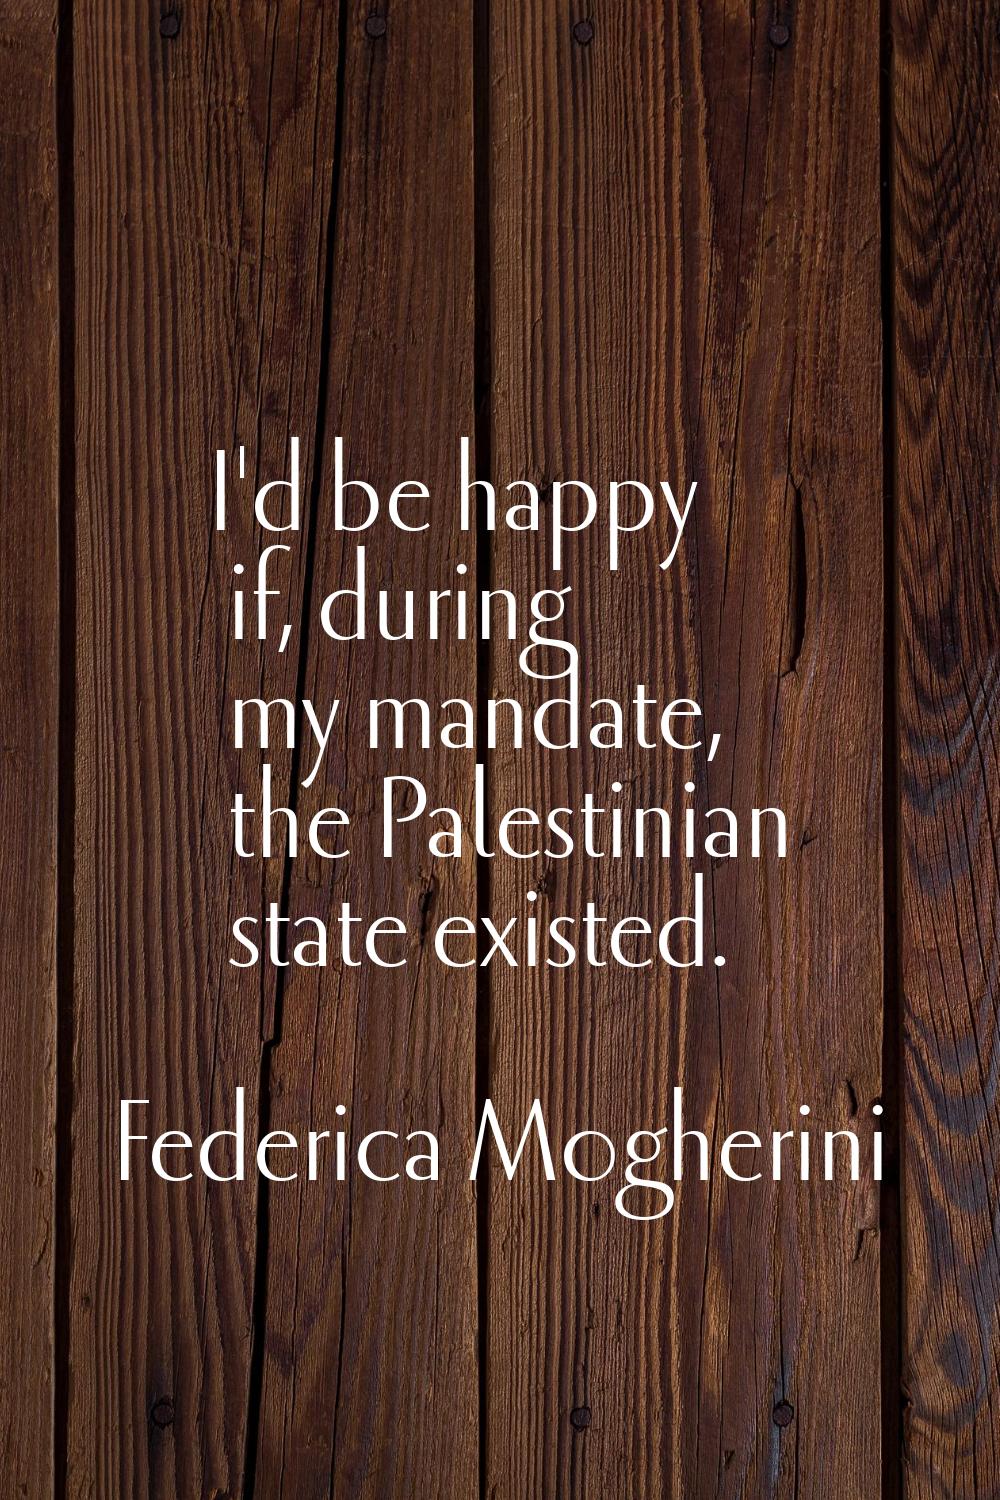 I'd be happy if, during my mandate, the Palestinian state existed.